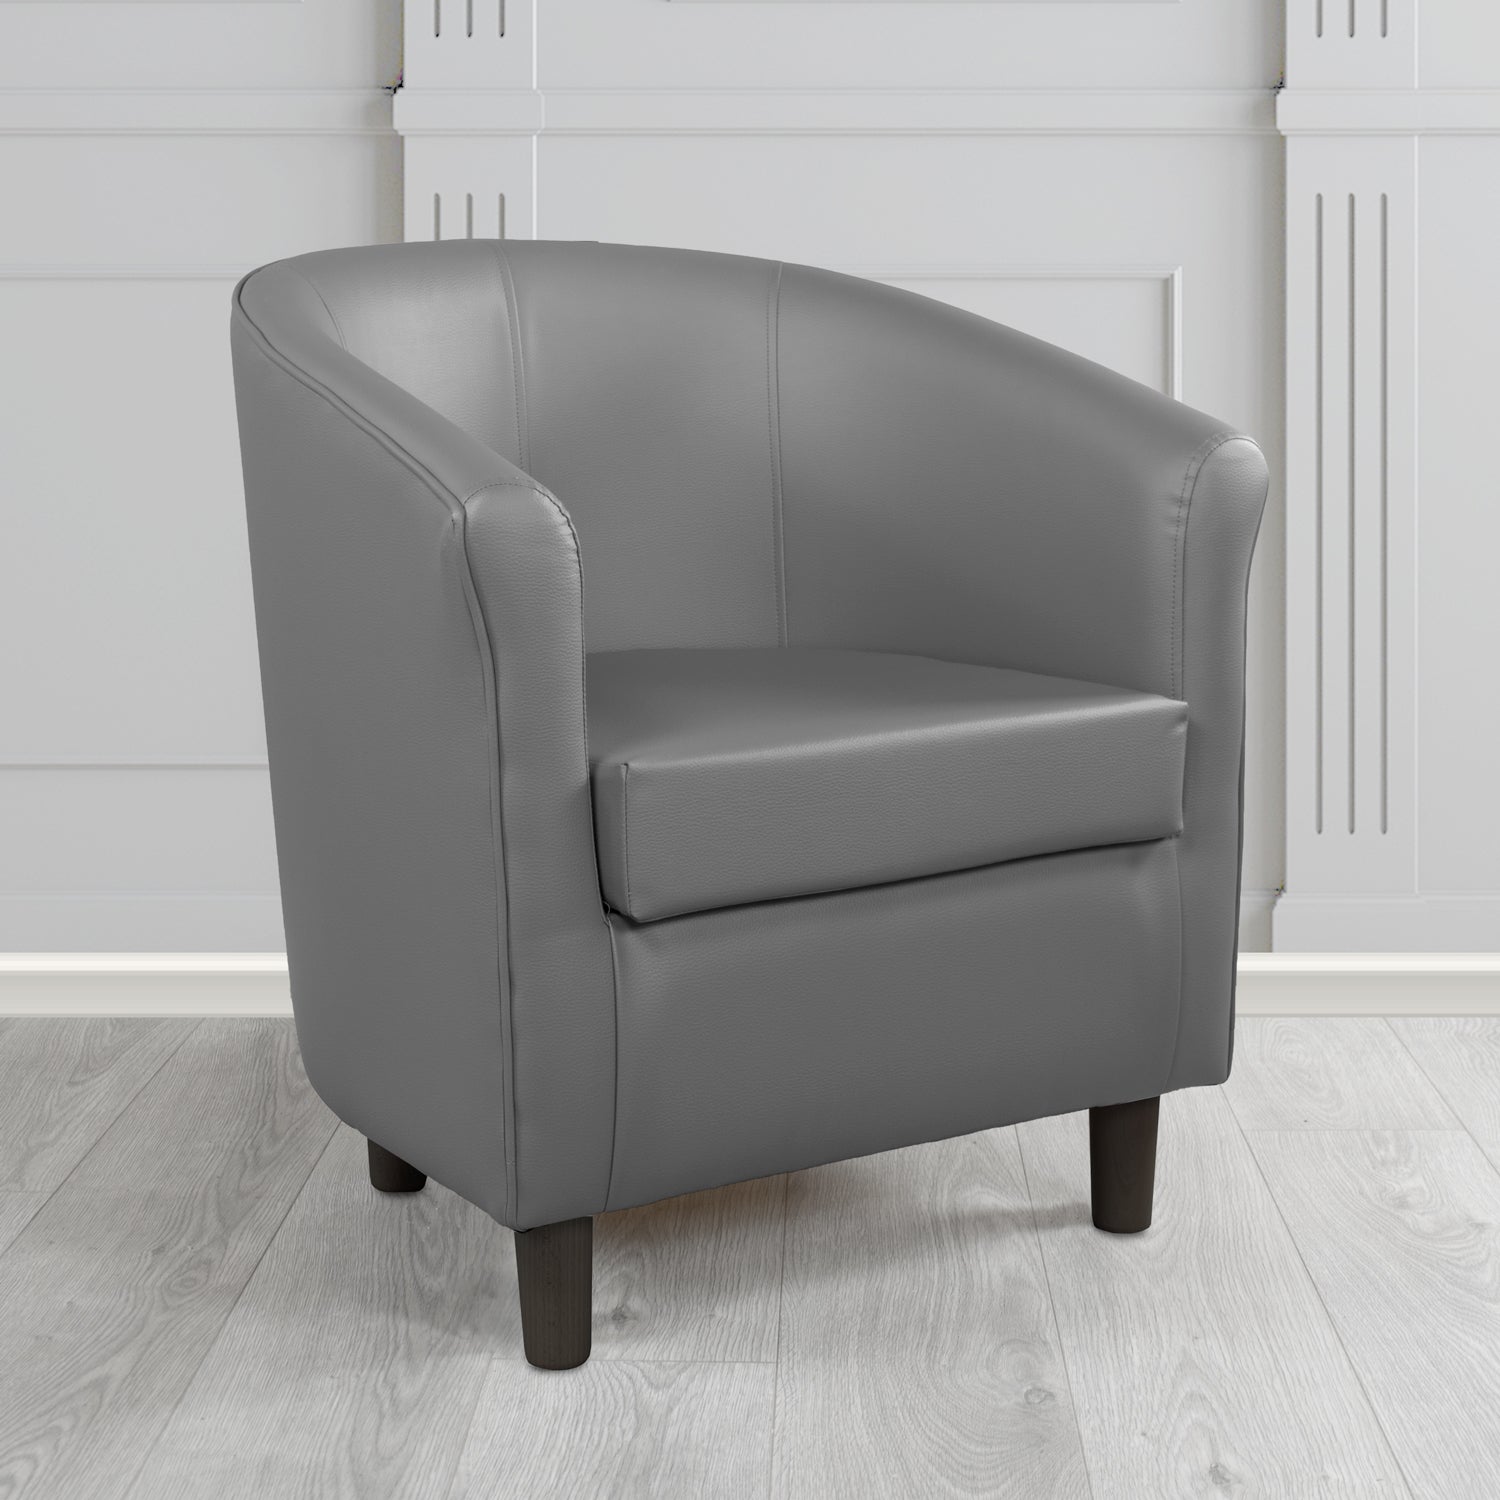 Tuscany Just Colour Greyfriar Antimicrobial Crib 5 Contract Faux Leather Tub Chair